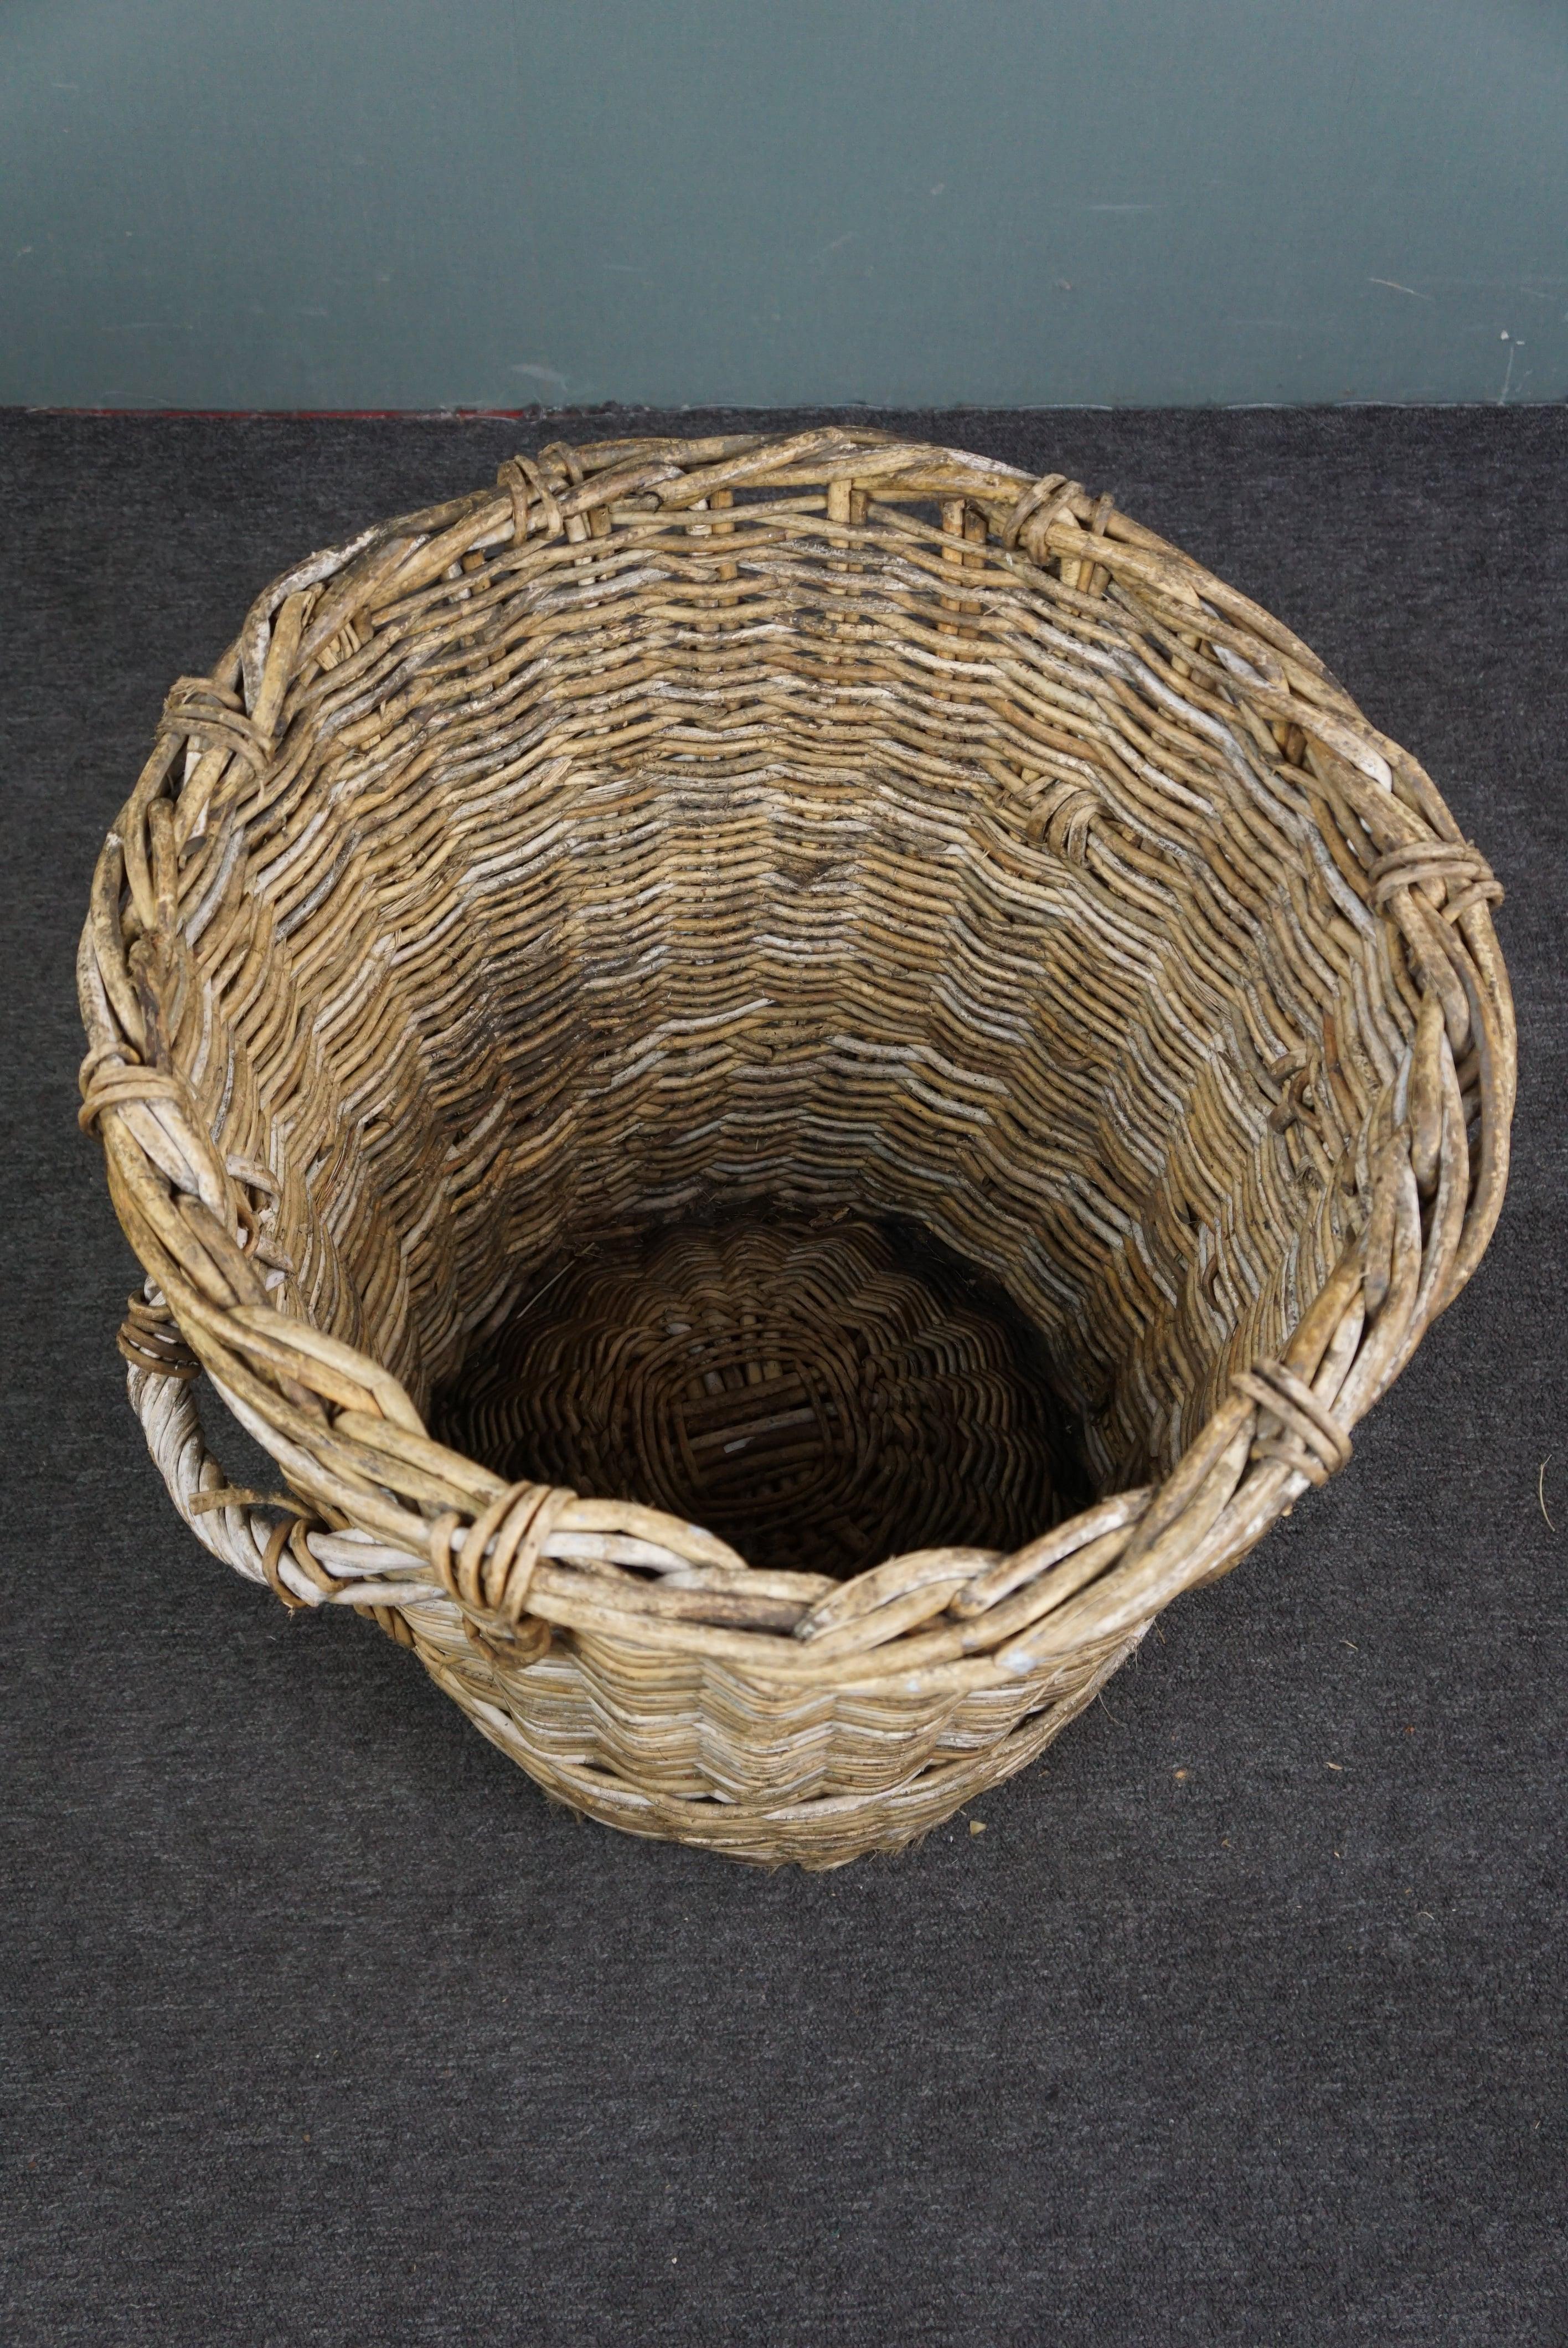 Offered is this large wicker basket for wooden blocks.
Next to a crackling fire we place a hand-woven wicker basket that fits many logs. This large basket is handy and also looks great next to the fireplace. Due to age, this basket has a beautiful